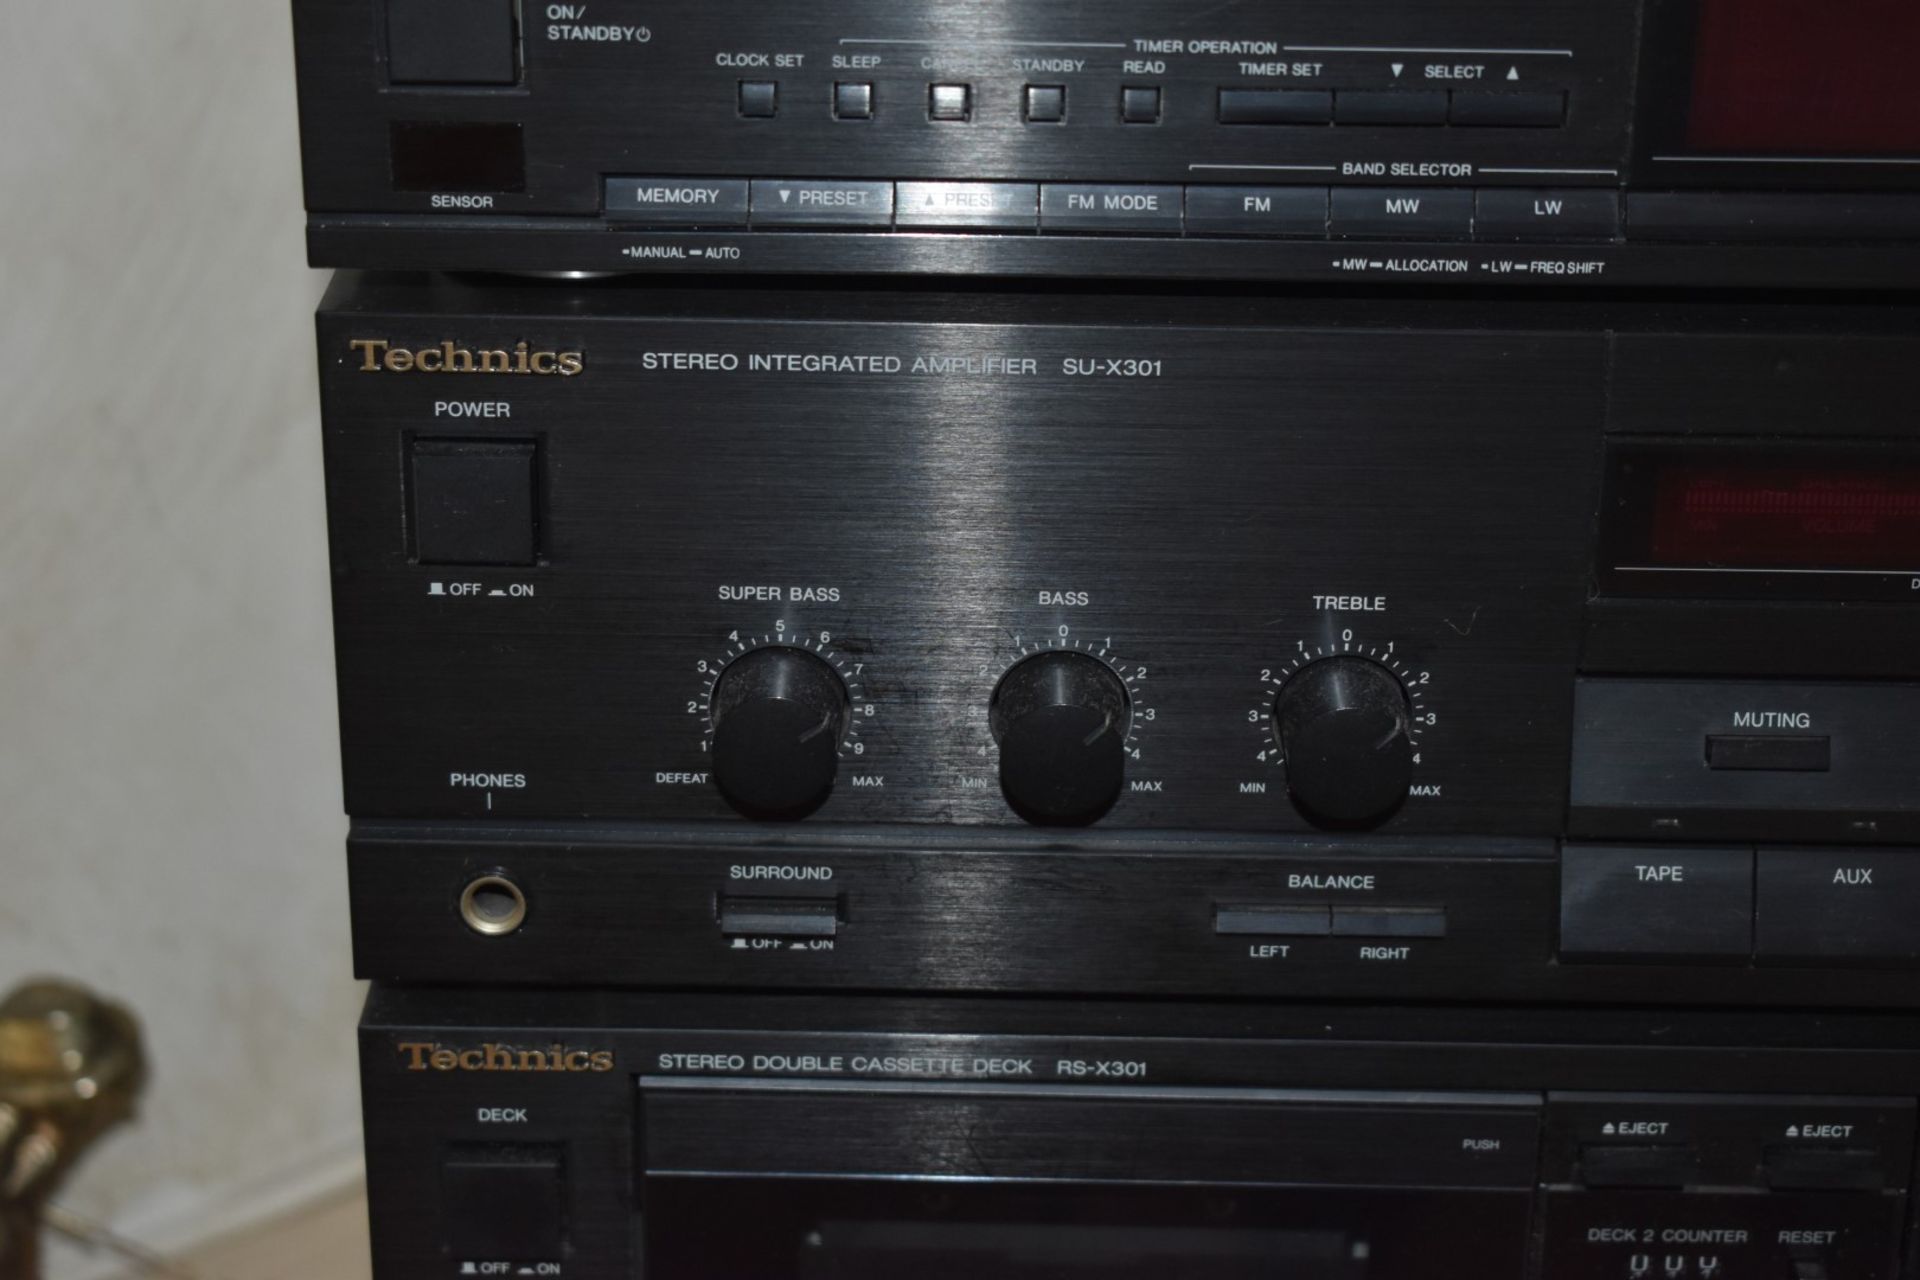 1 x Technics Separates Stereo System - Includes LW/MW/FM Tuner, Integrated Amplifier, Double - Image 4 of 9